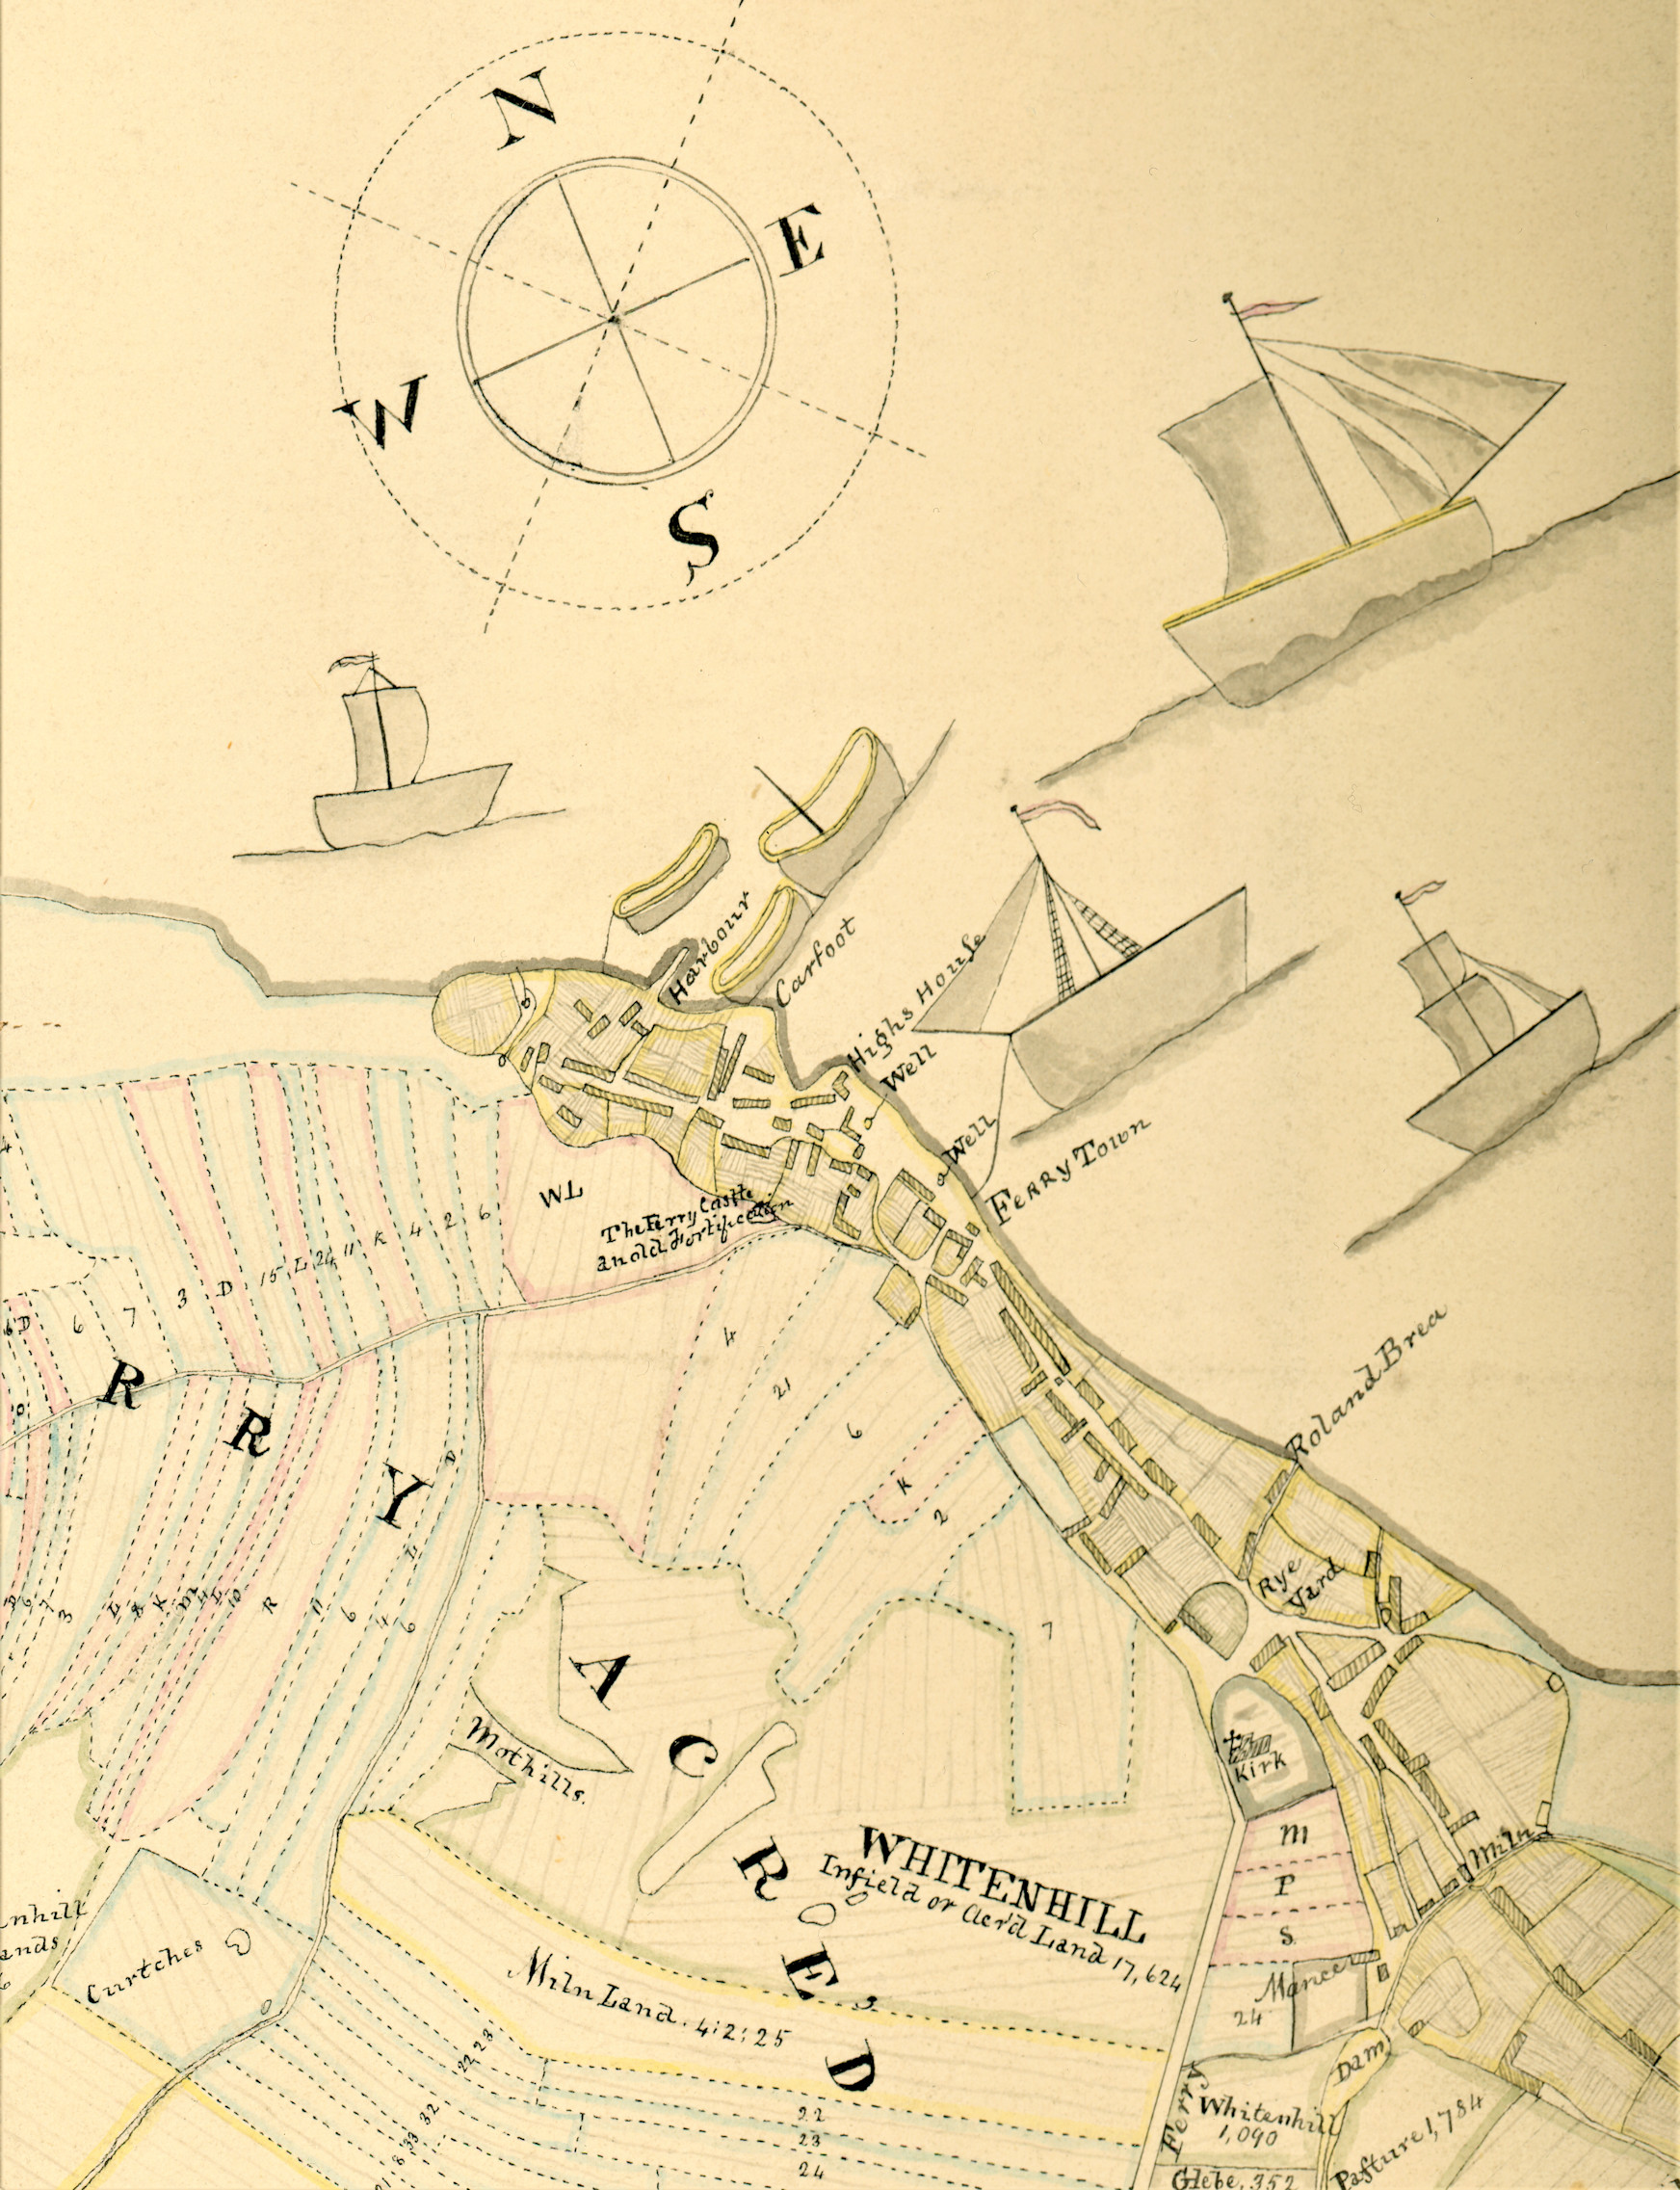 Tayport Heritage Trail - Board 12 - The 1769 map of the Ferry Acred Land of the Estate